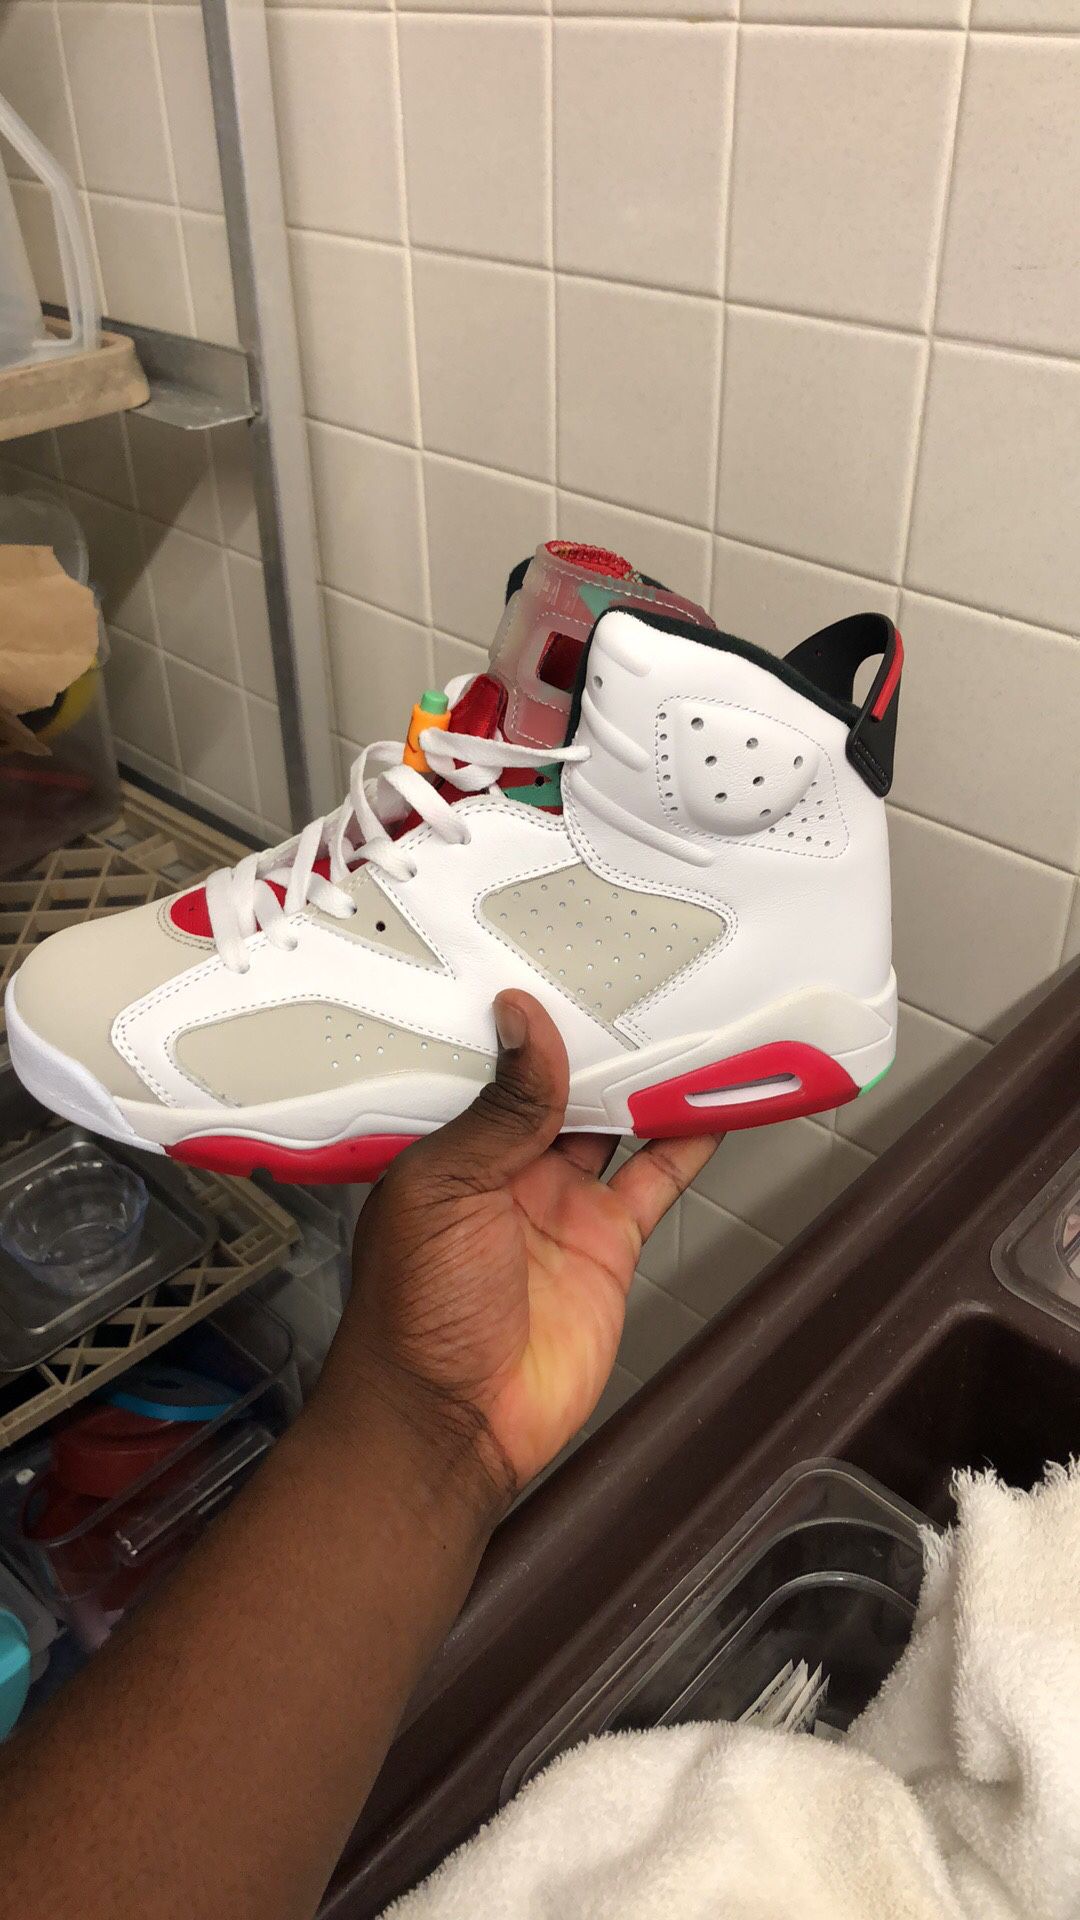 Retro 6s only Worn Once